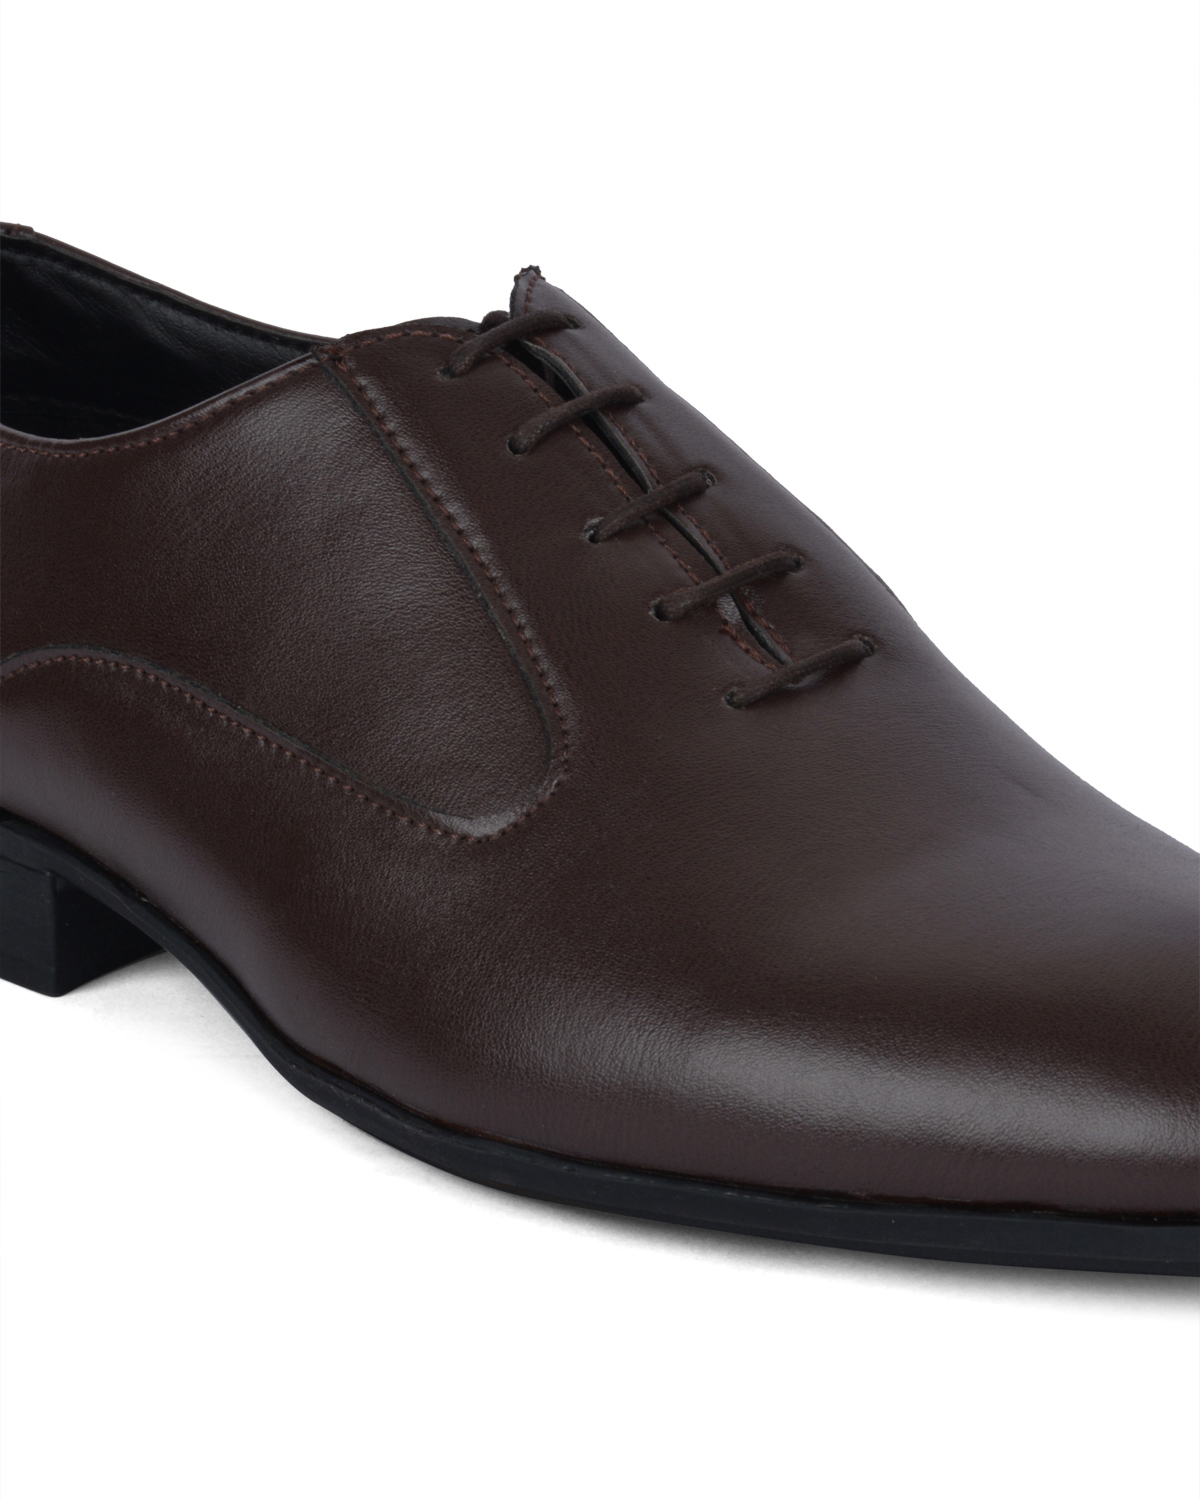 Buy Ziraffe ASCENT Brown Men'S Leather Formal Shoes Online @ ₹2499 from ...